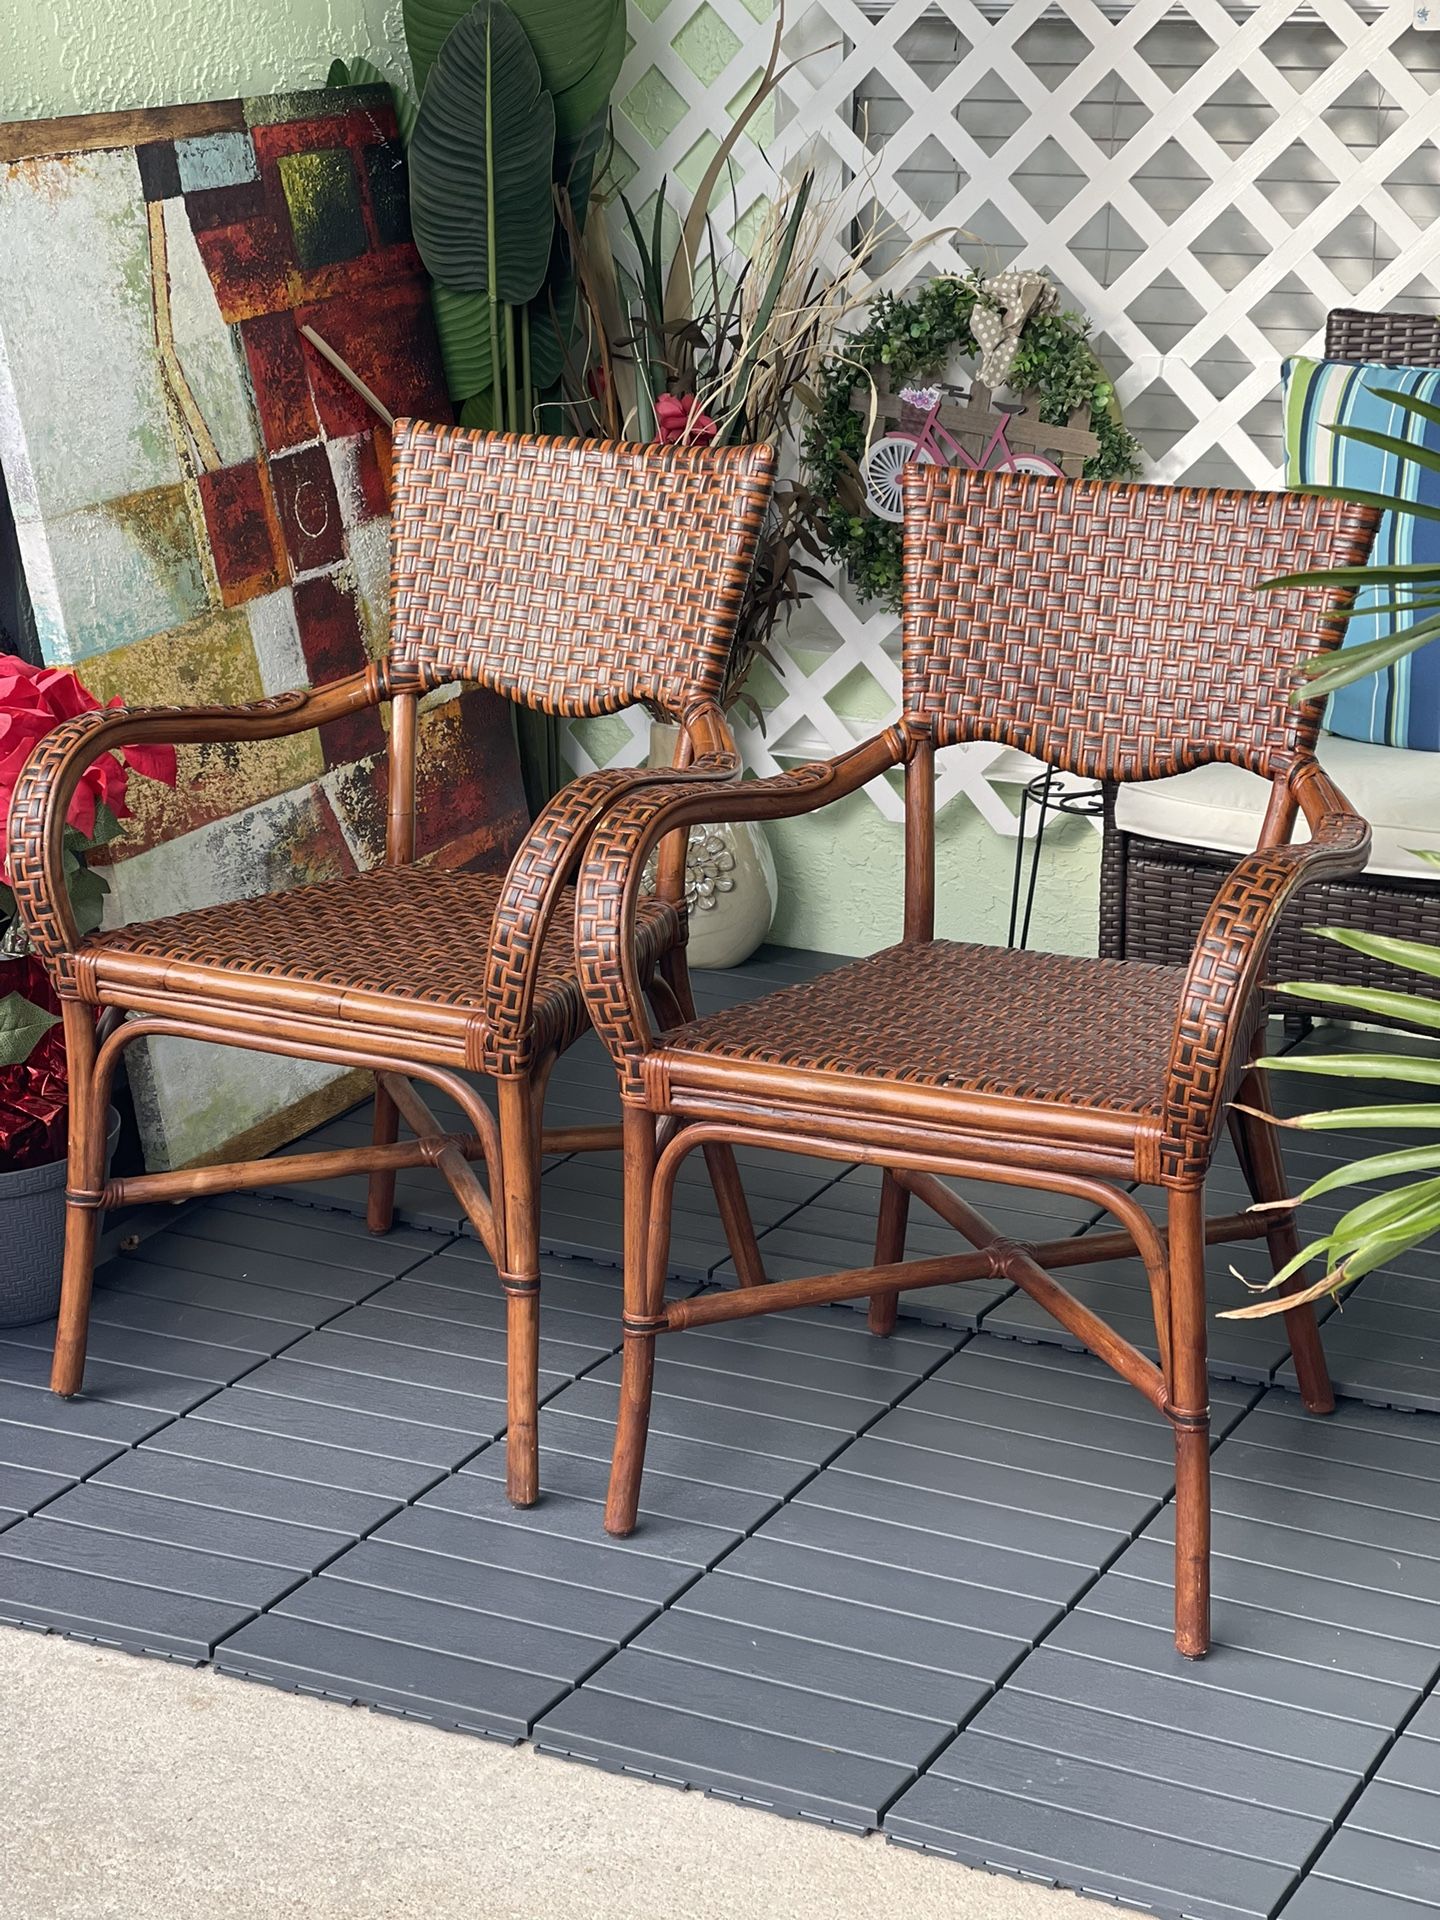 1990’s Vintage Bent Bamboo Basket Armchairs Set Of 2 